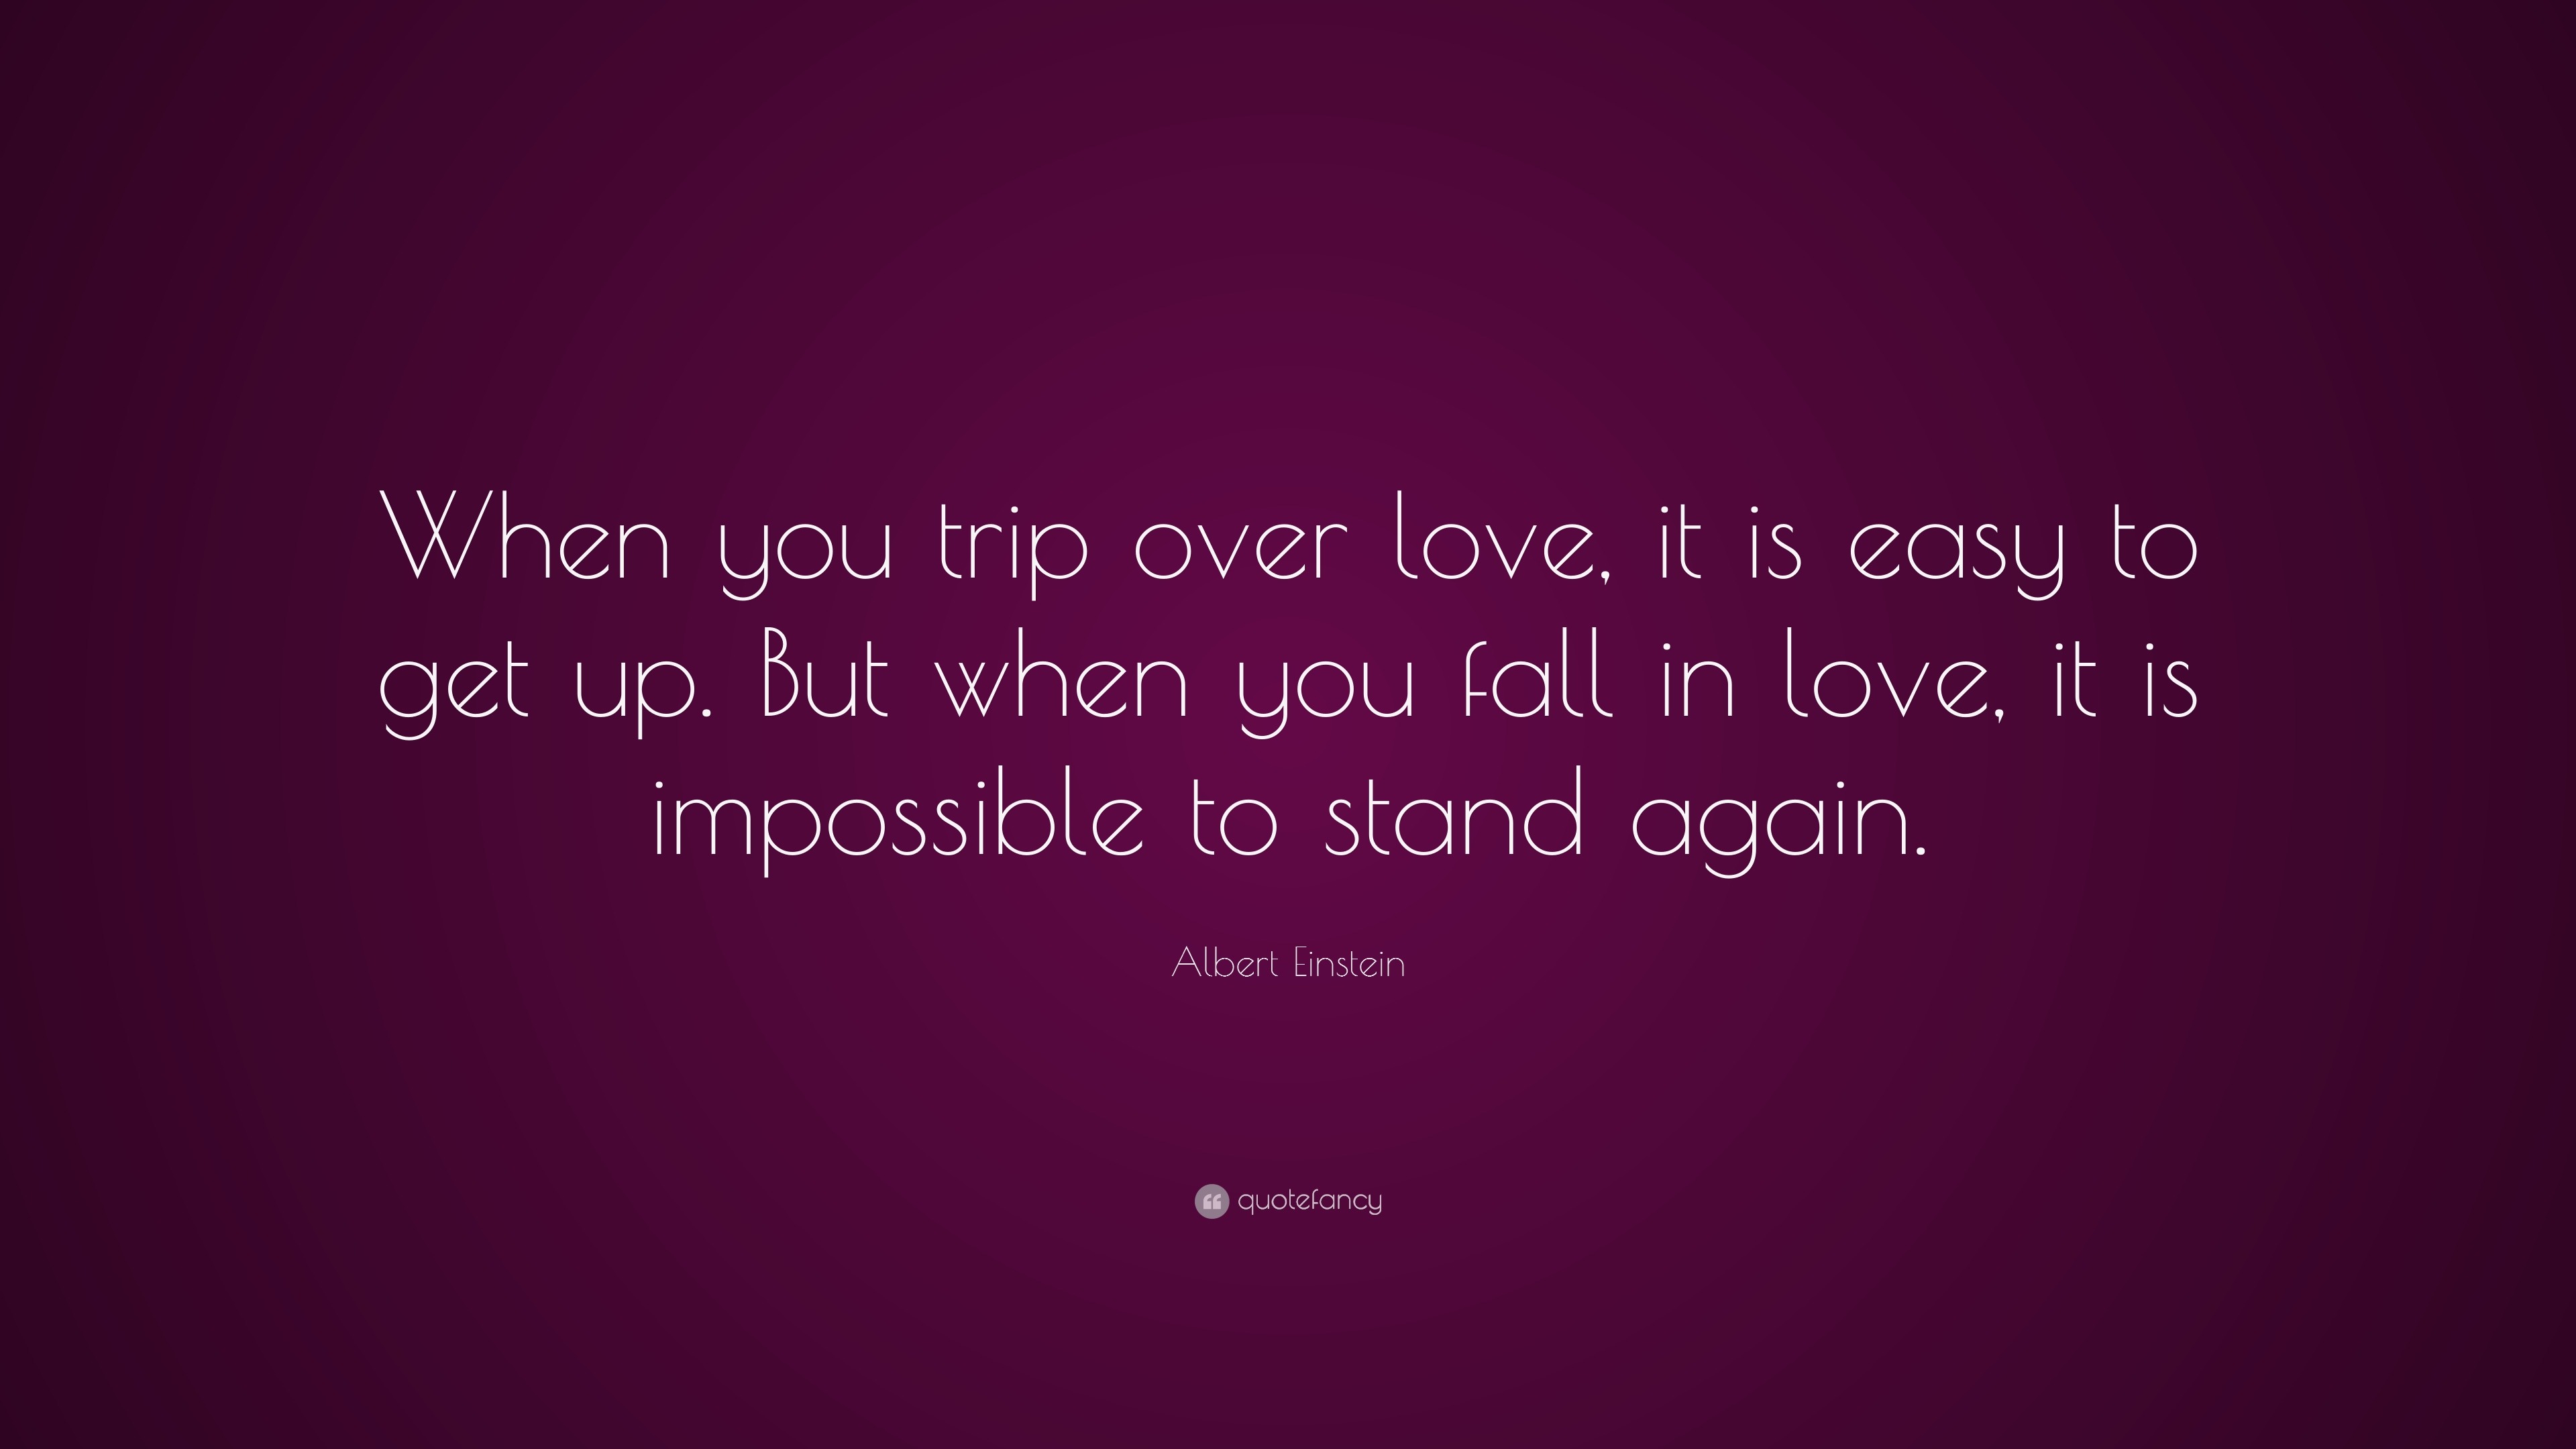 but when you fall in love, it is impossible to stand again.